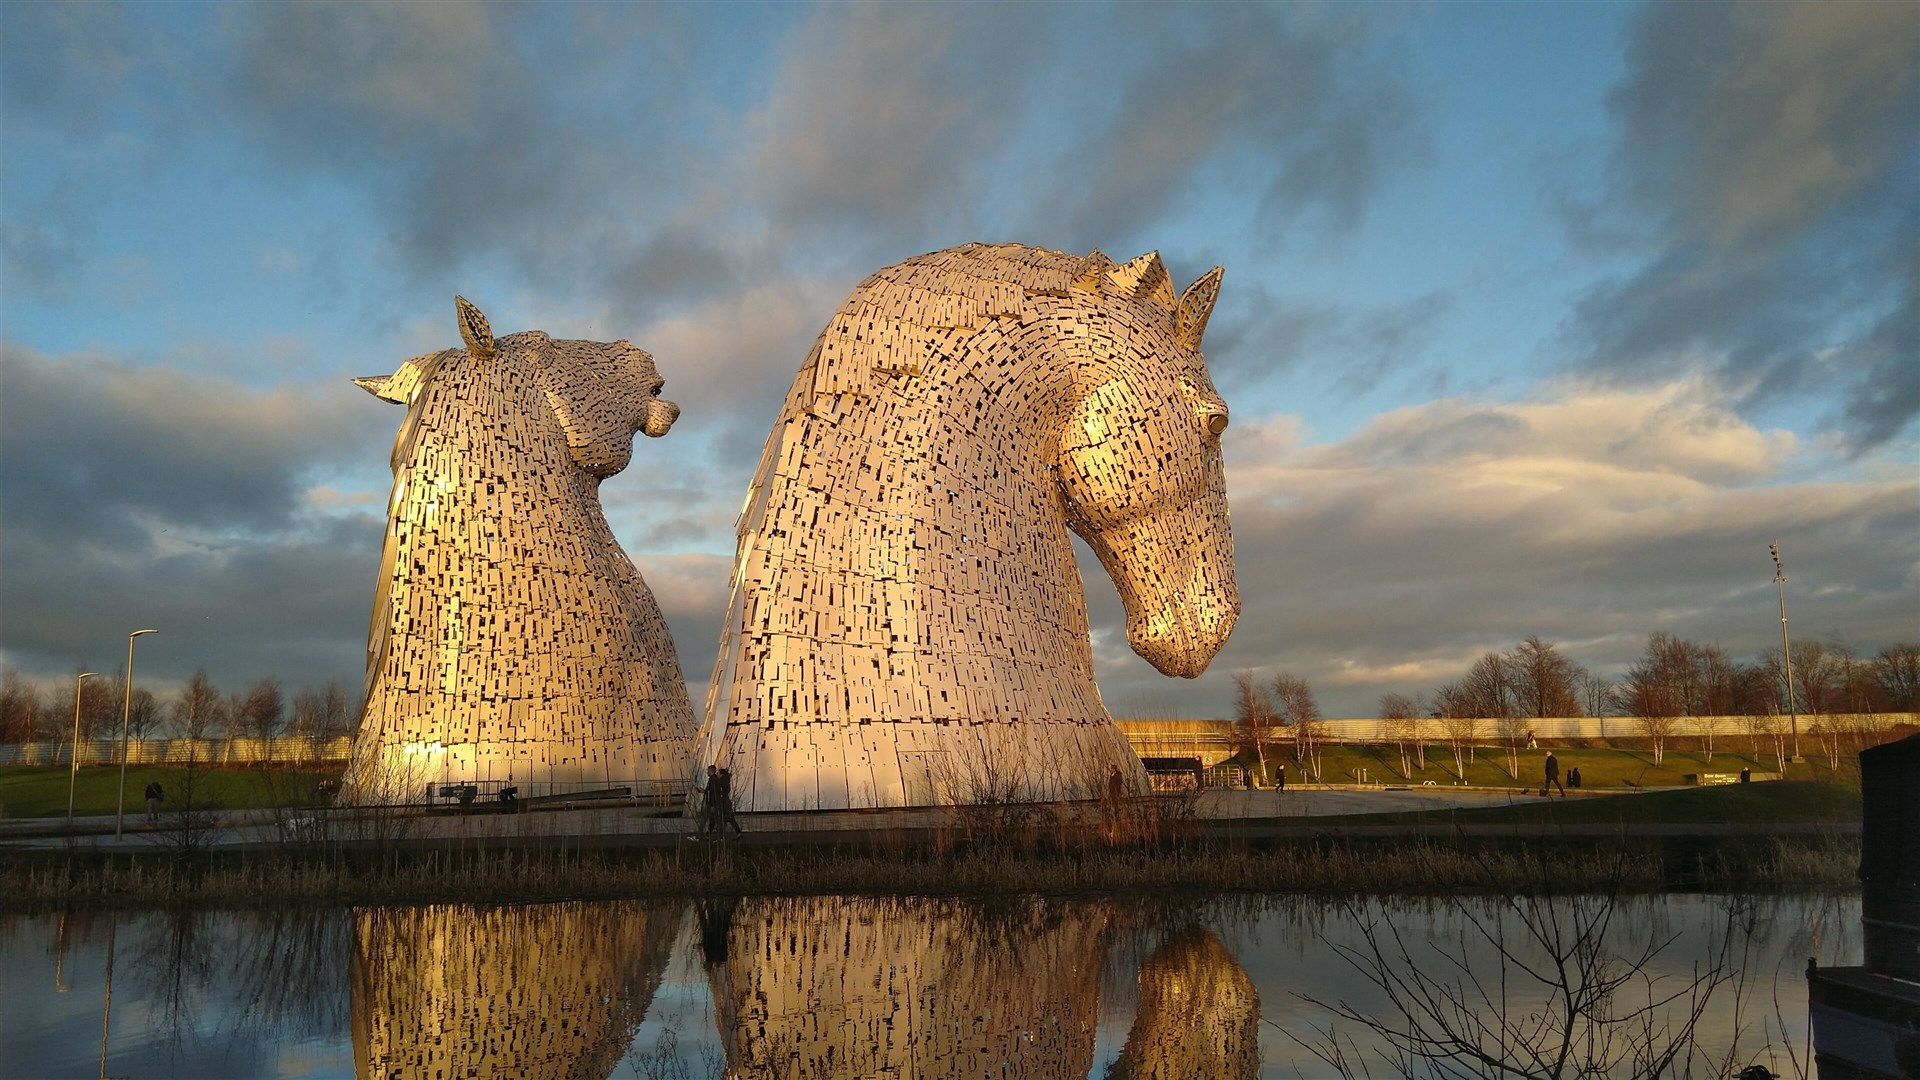 The Kelpies never fail to soothe the soul. .